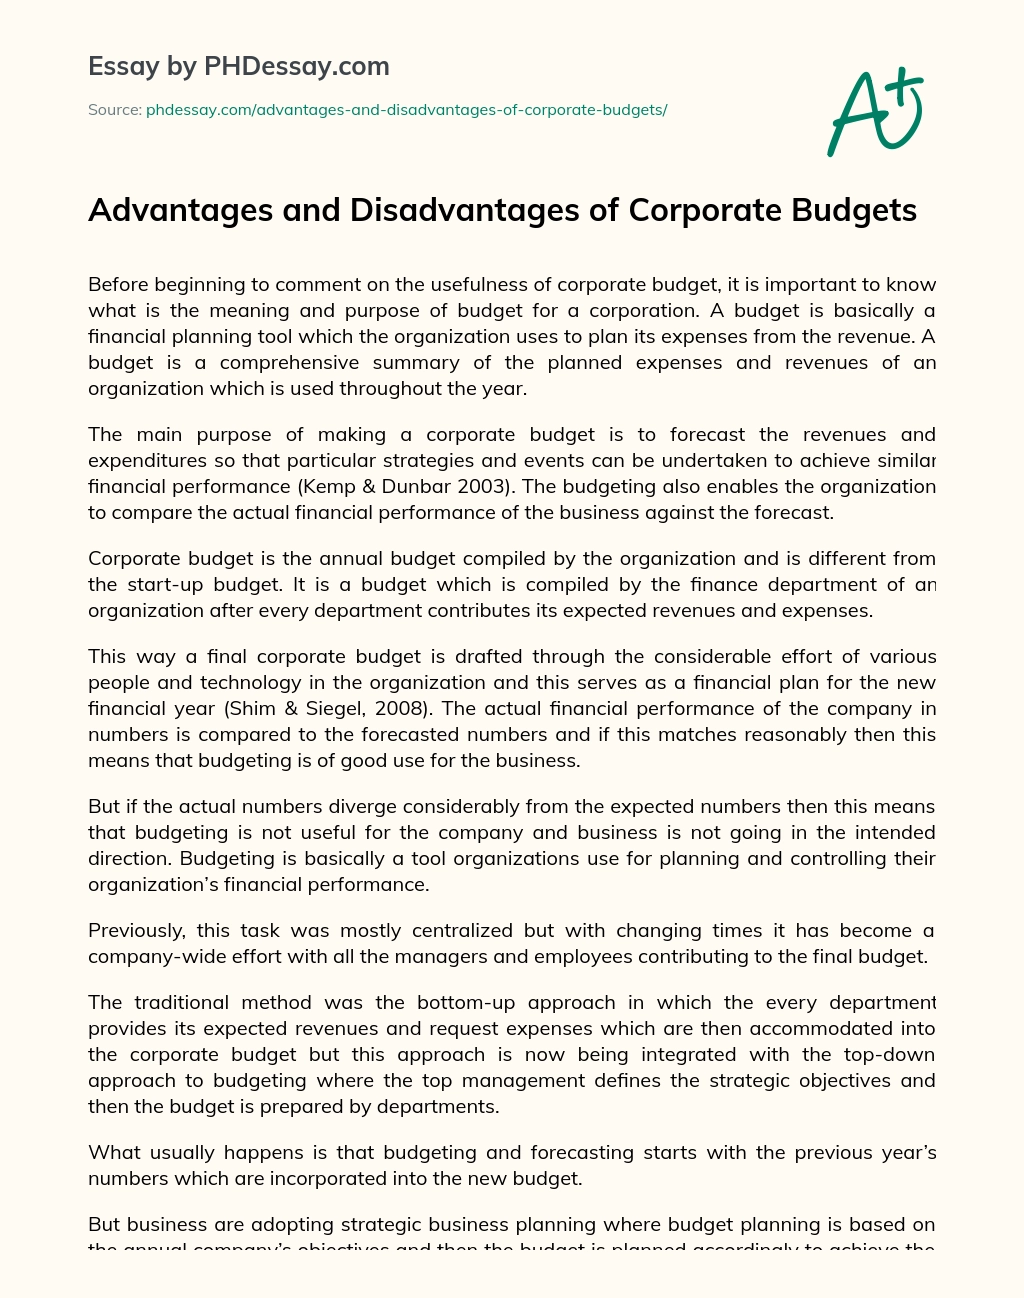 Advantages and Disadvantages of Corporate Budgets essay